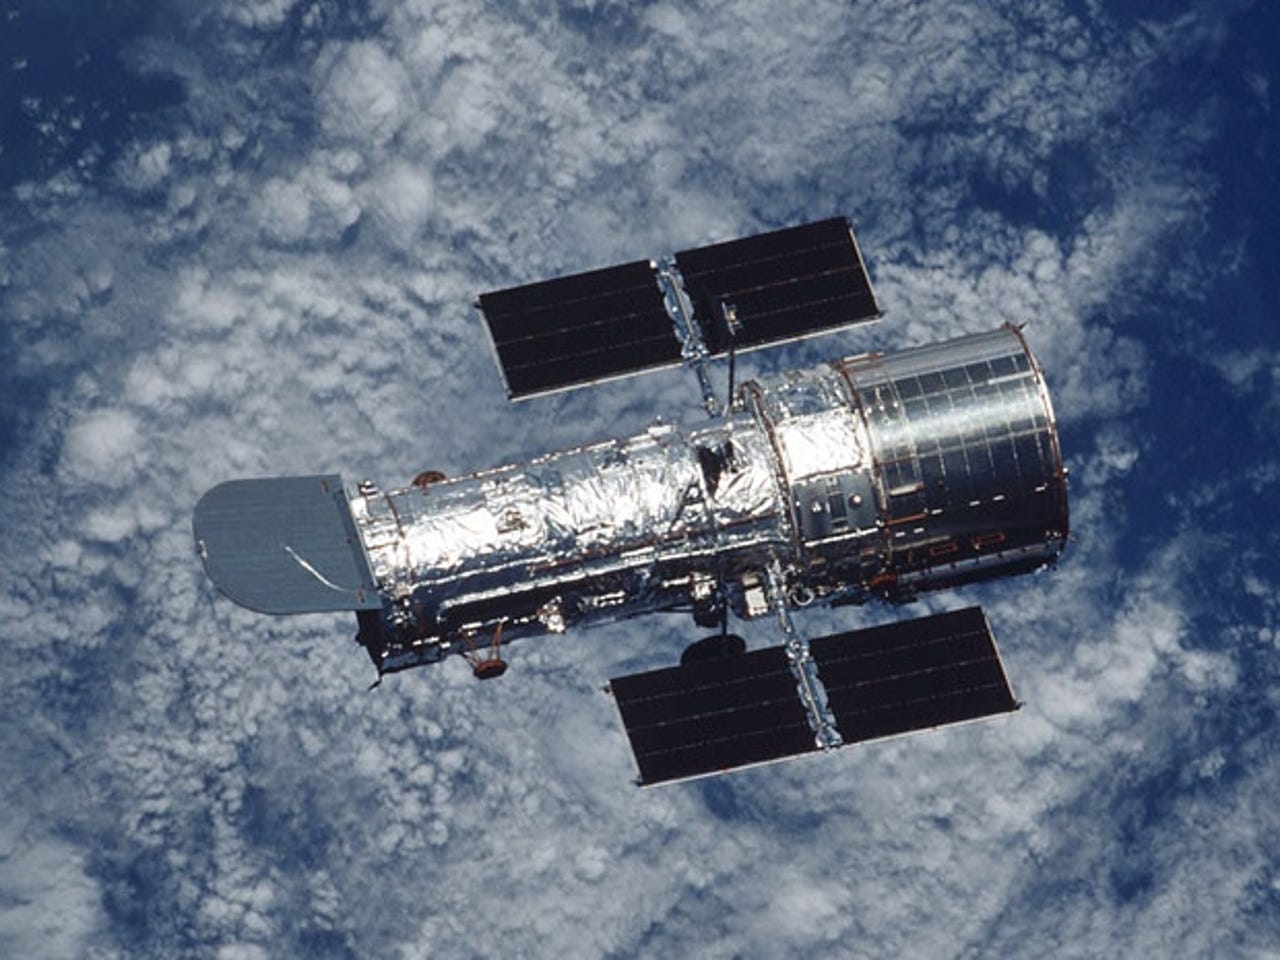 Theseus Pat spellen NASA and SpaceX explore private mission to extend Hubble telescope's life |  ZDNET